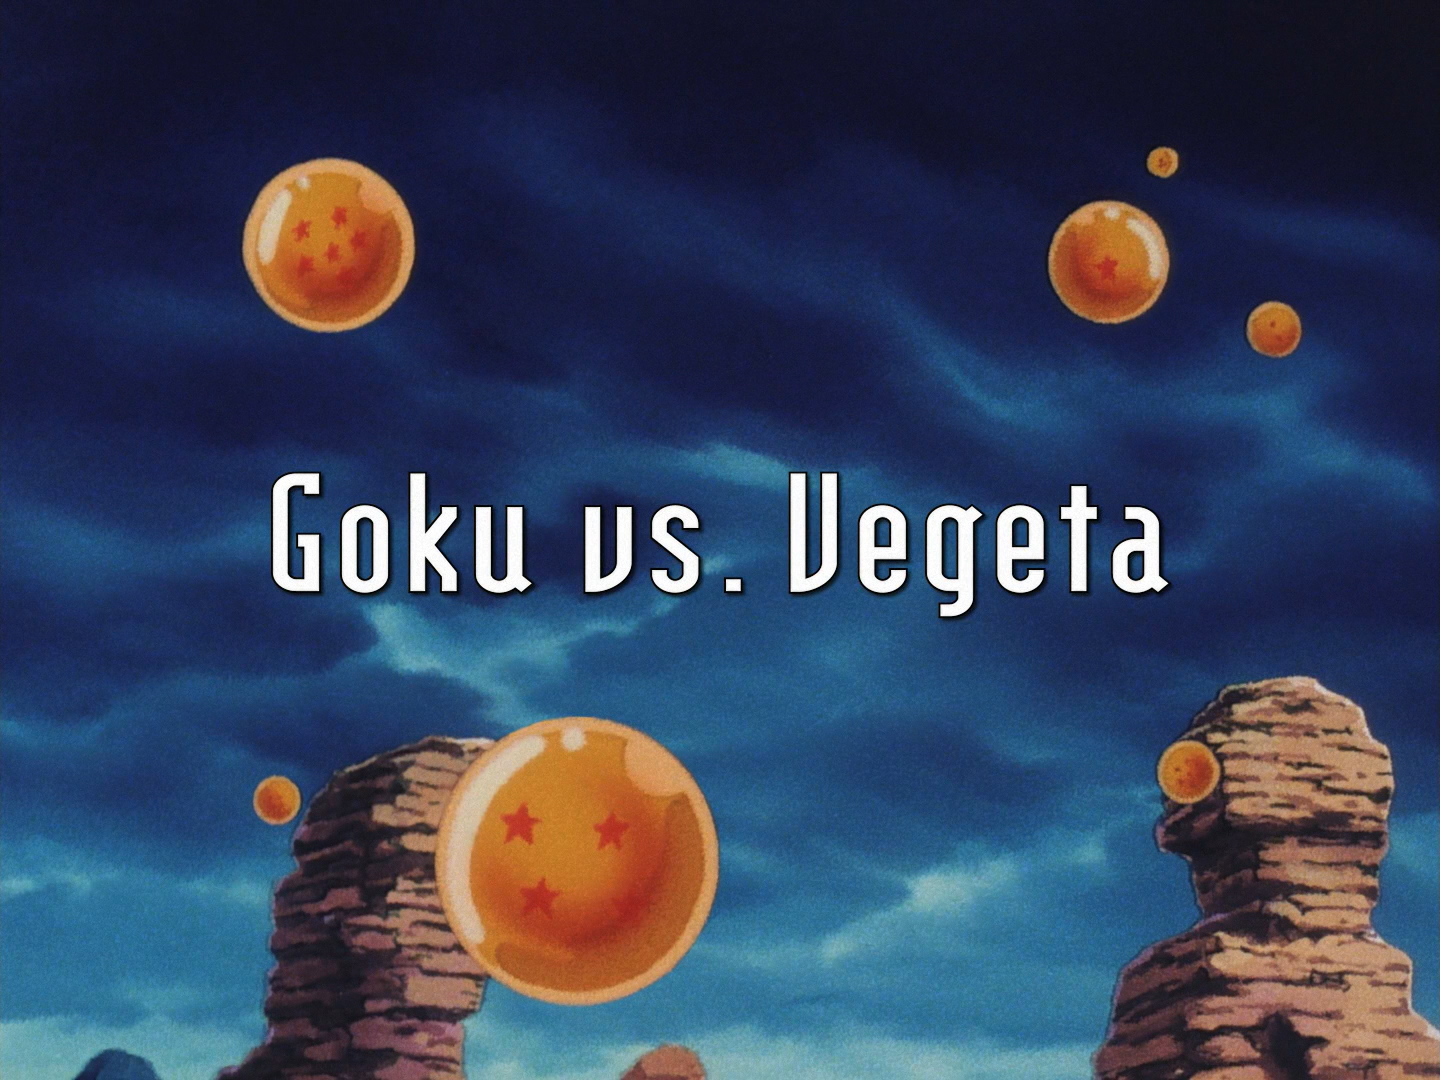 What do you think Planet Vegeta is like when a Full Moon strikes